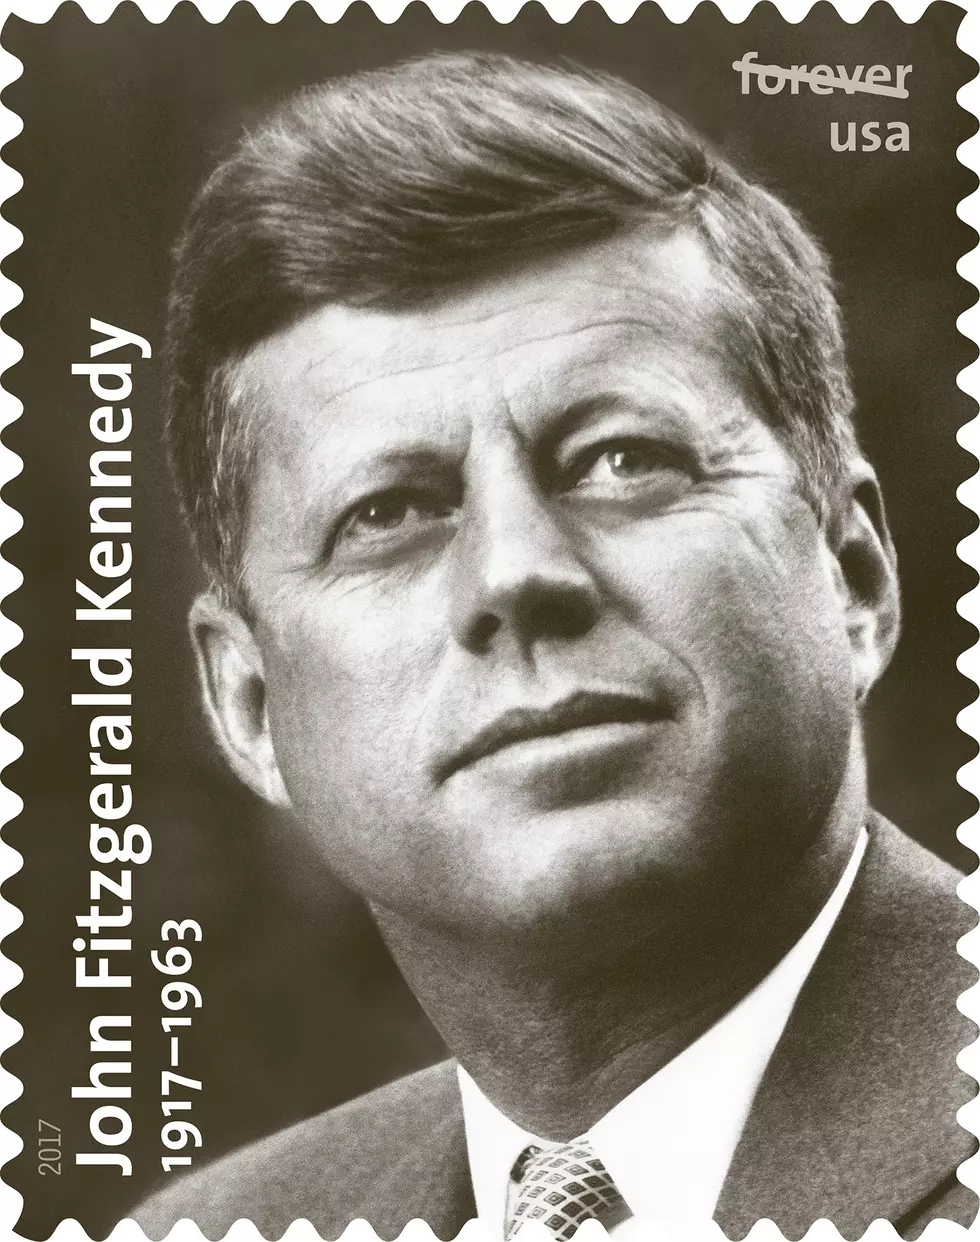 John F. Kennedy &#8216;Forever Stamp&#8217; to be dedicated on President&#8217;s Day Monday